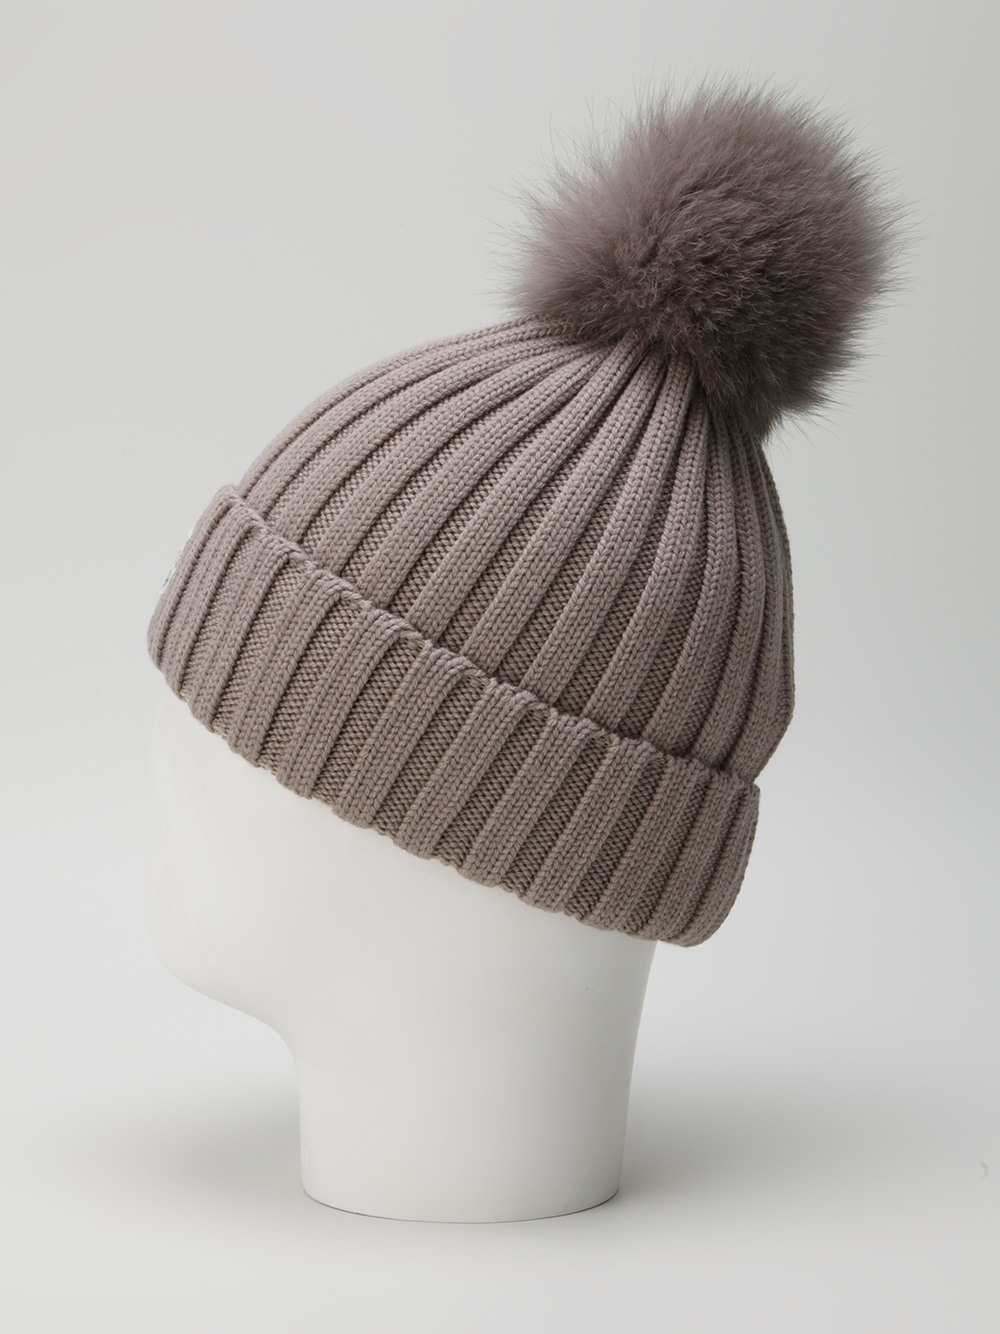 Moncler Wool Ribbed Knit Beanie Hat in Natural for Men - Lyst